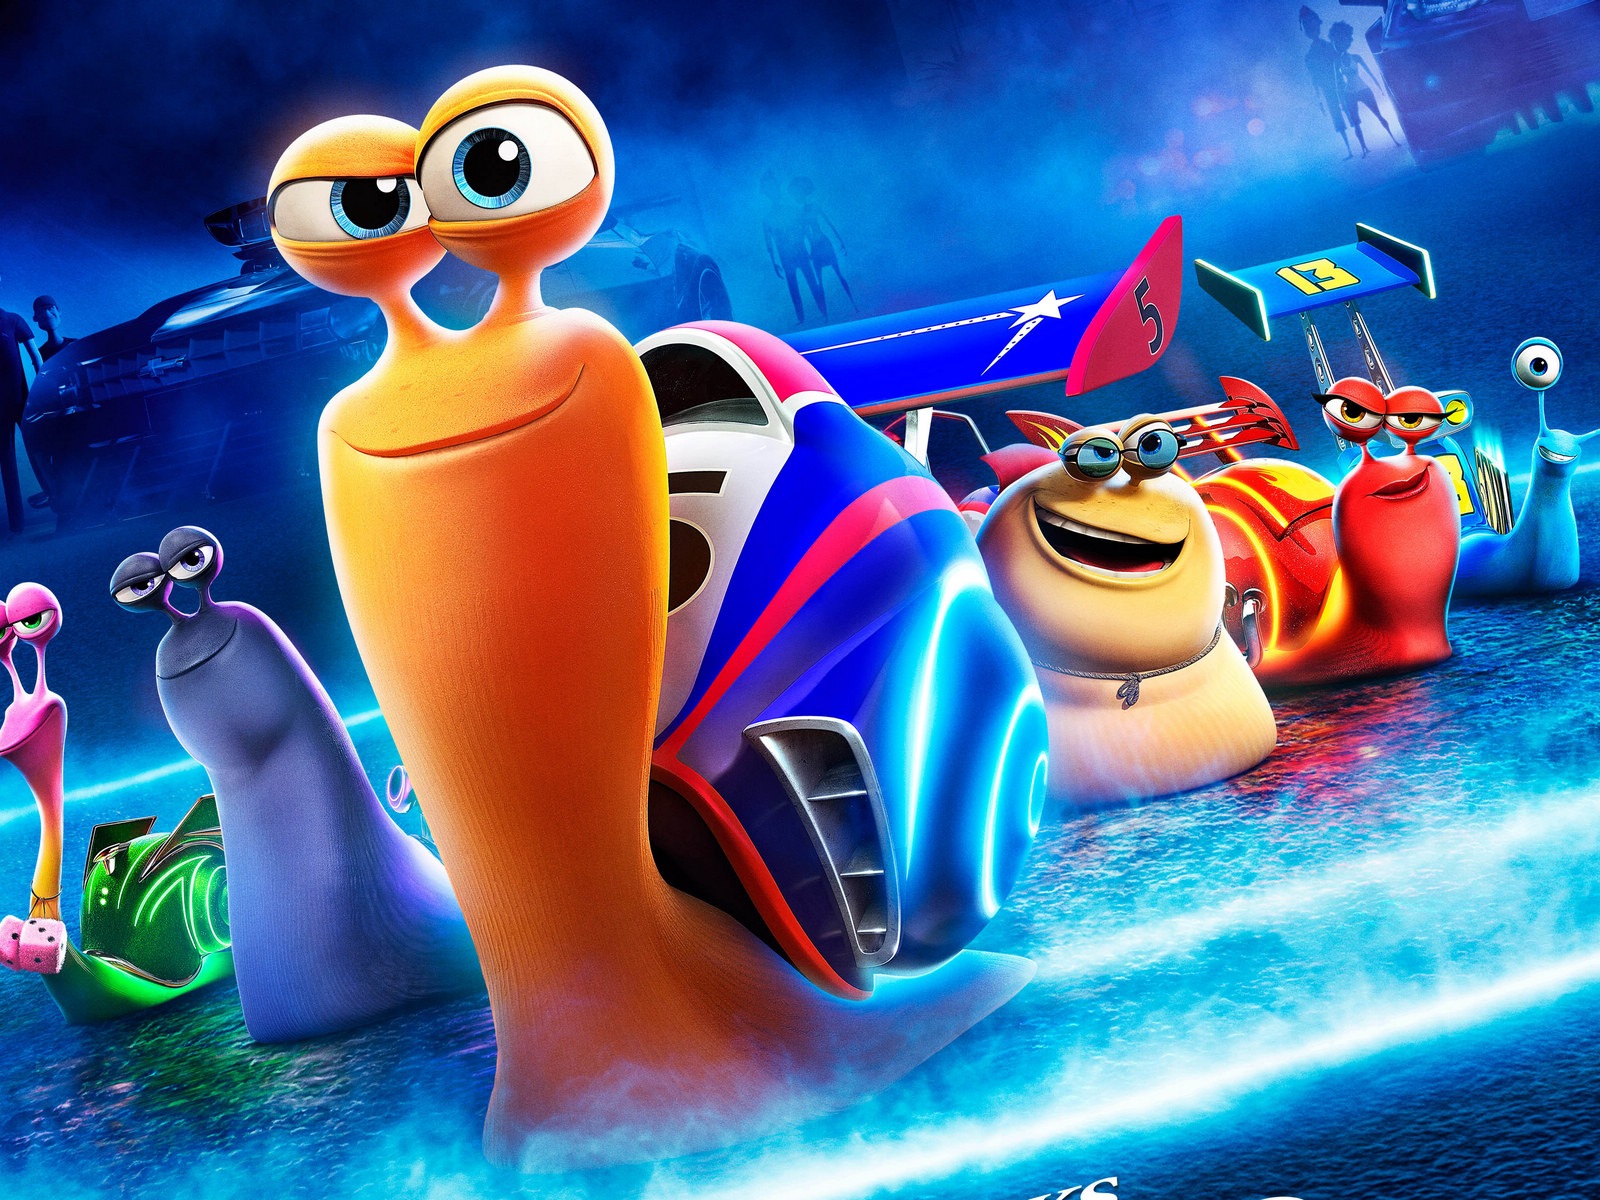 Turbo 3D movie HD wallpapers #1 - 1600x1200